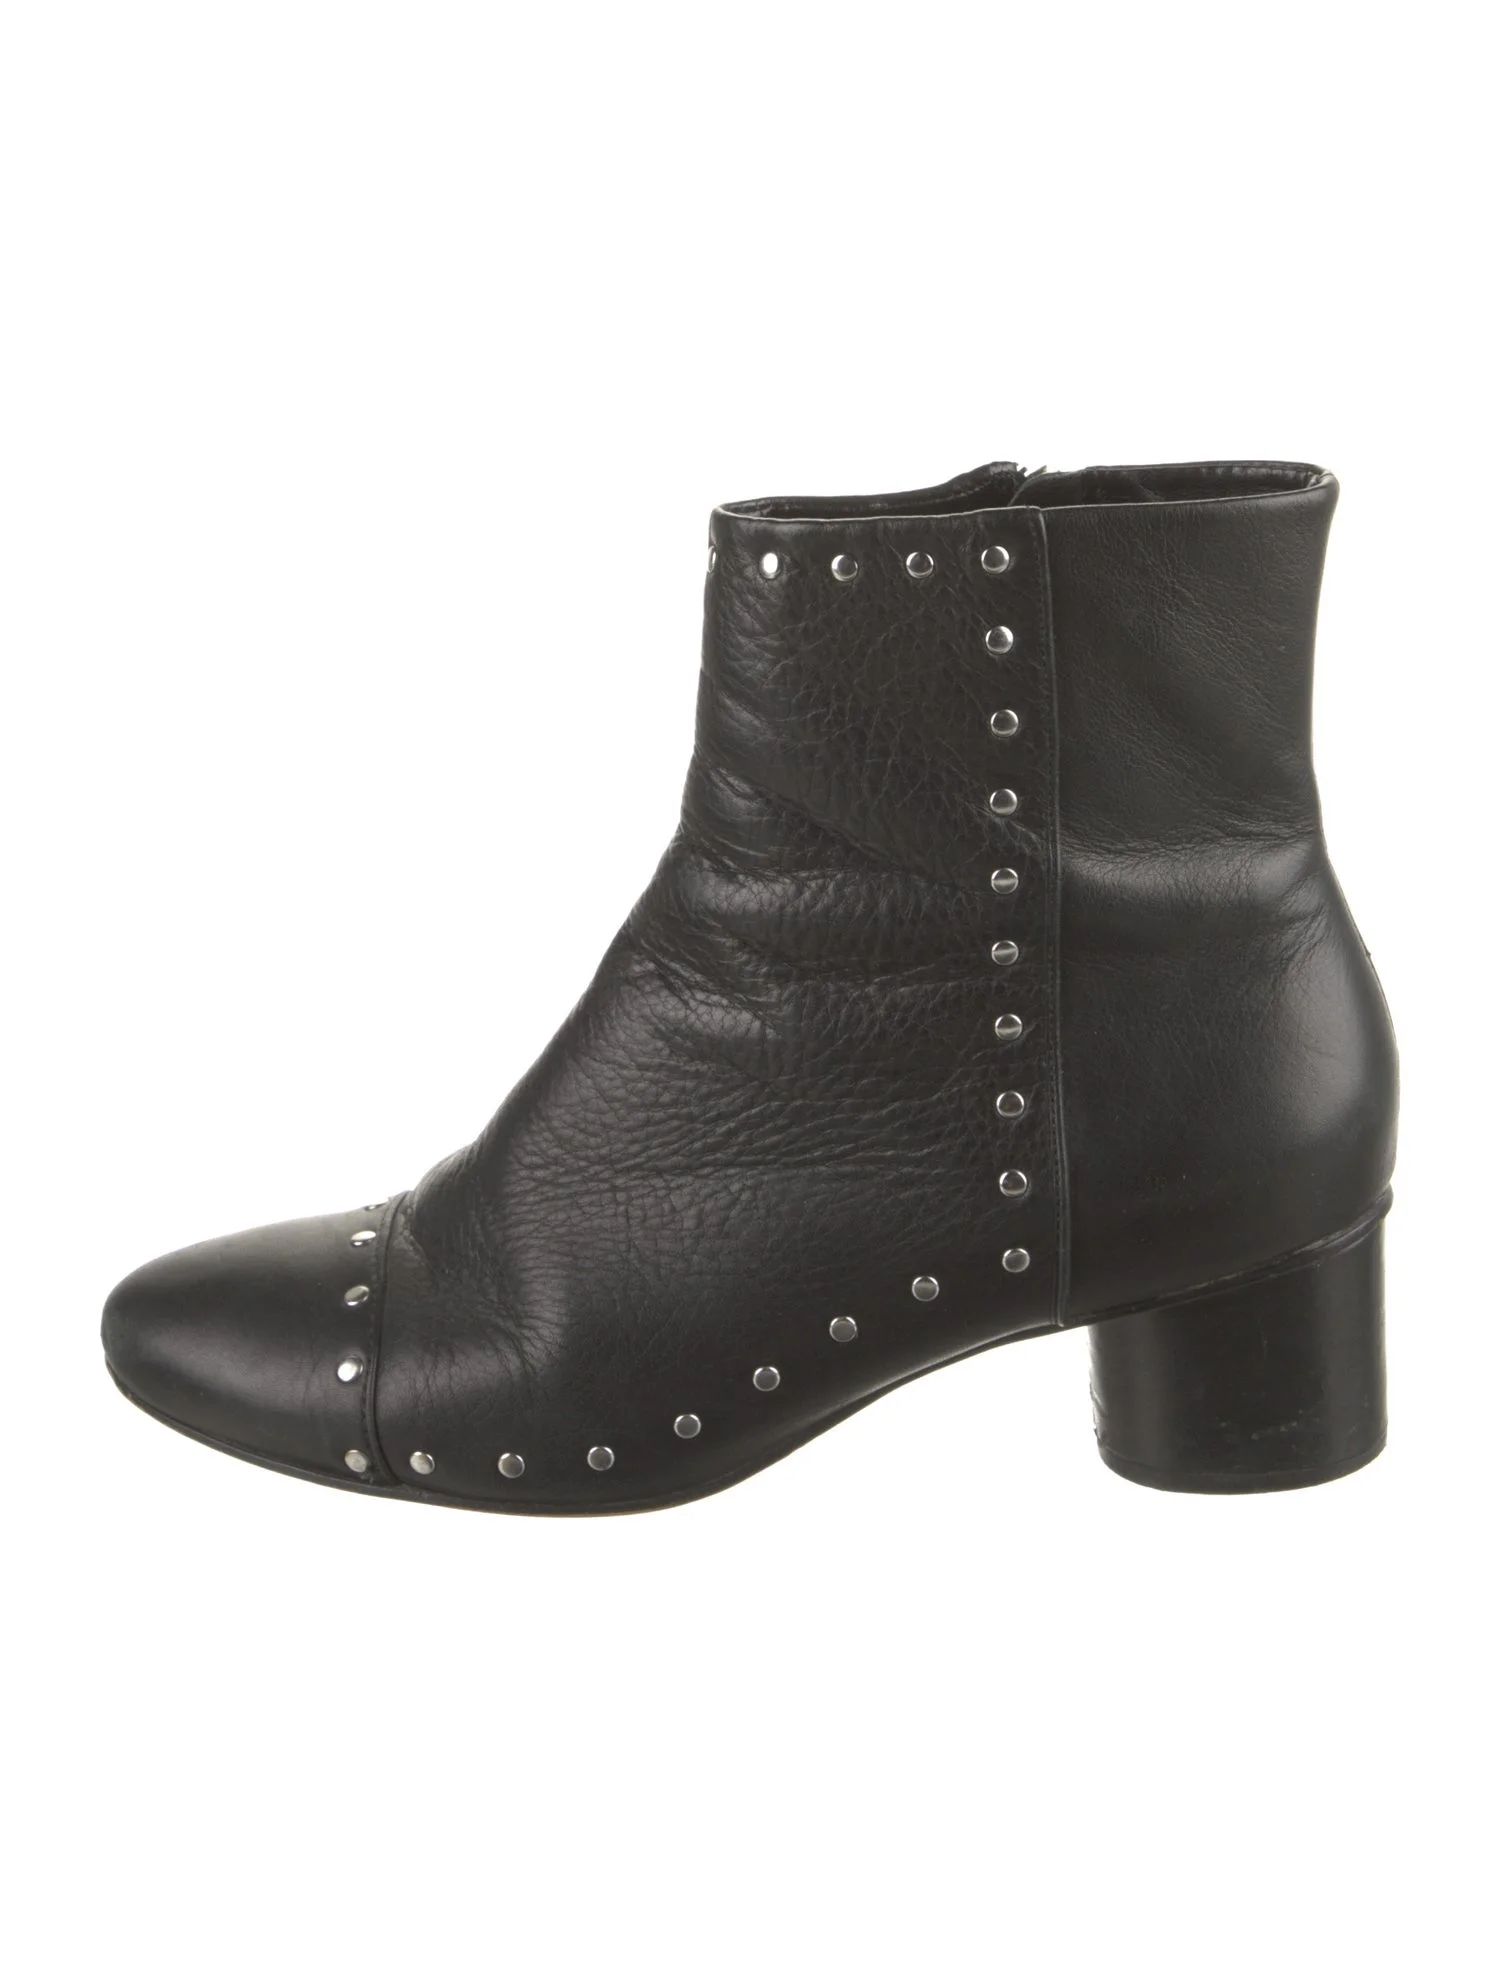 Leather Studded Accents Boots | The RealReal